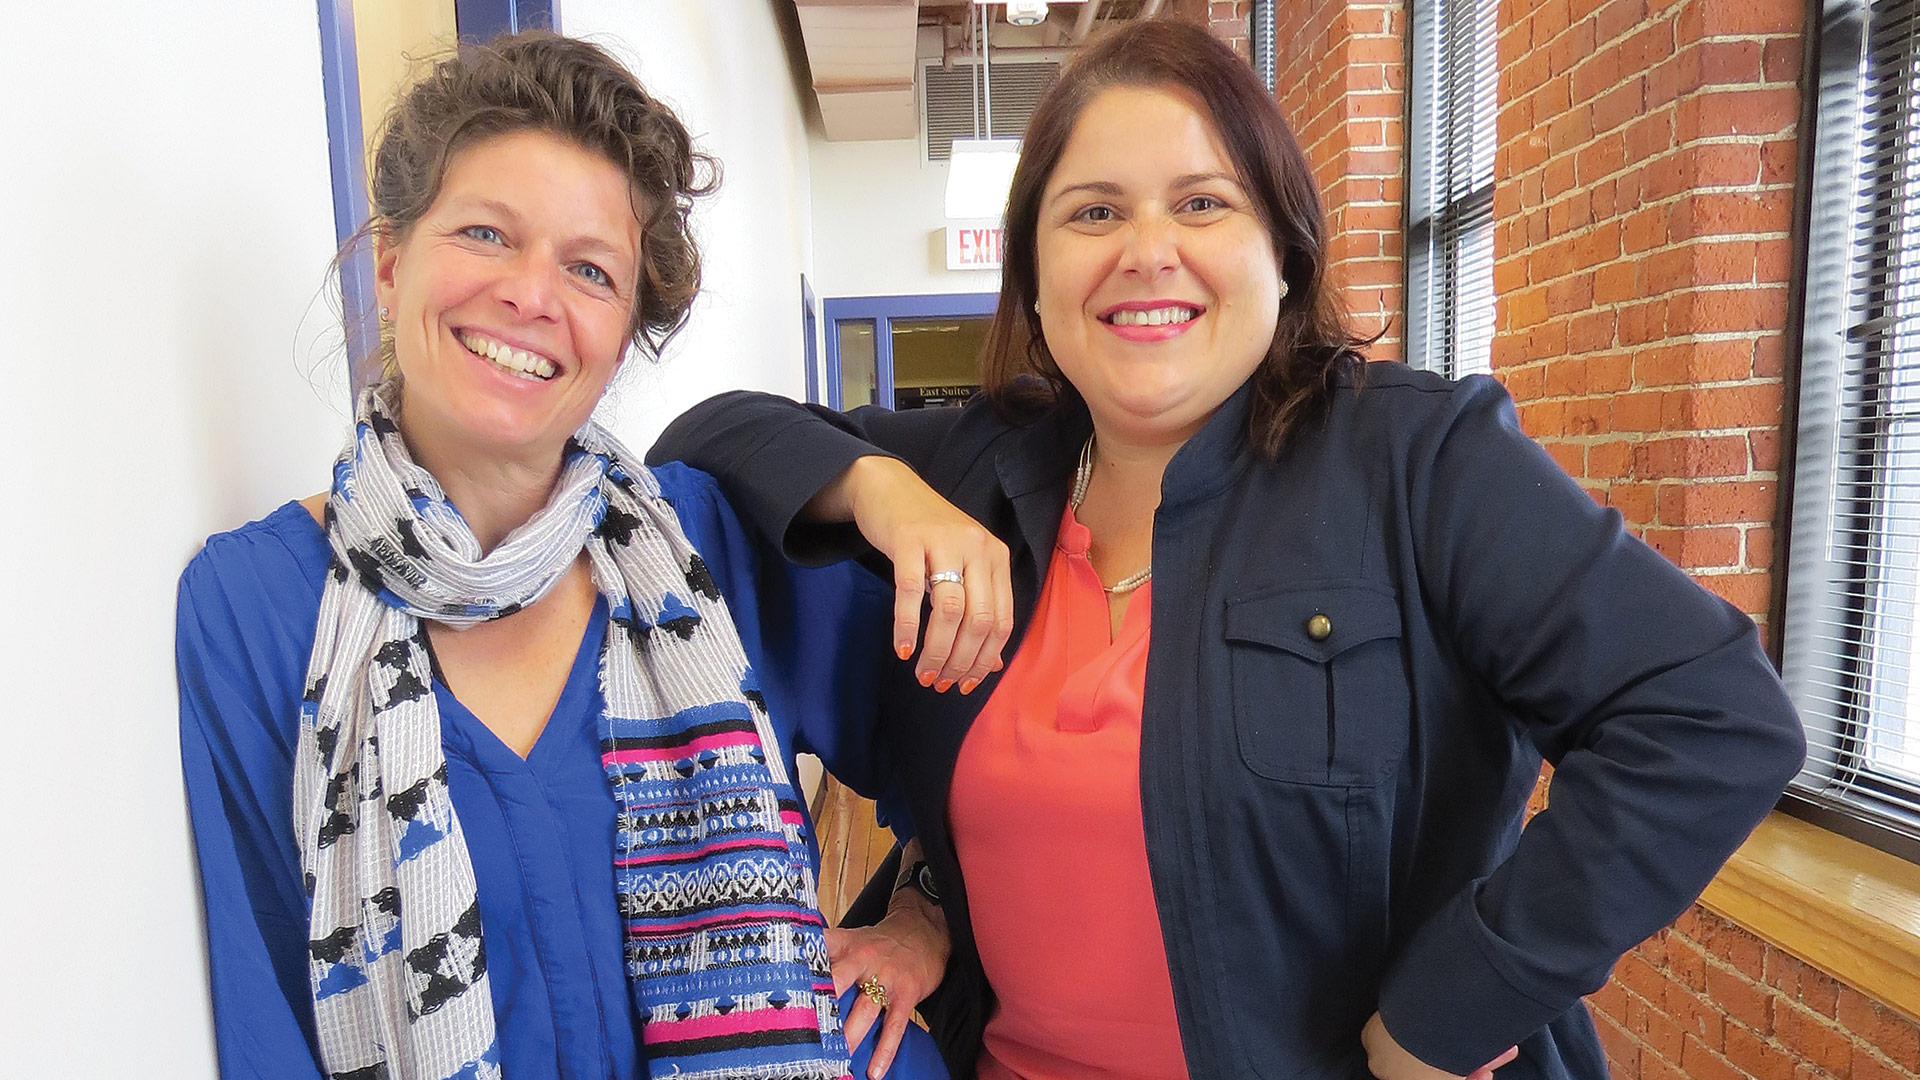 Robyn Caody, left, and Samalid Hogan are working to take Innovate413 to the next level as a resource to the region. 